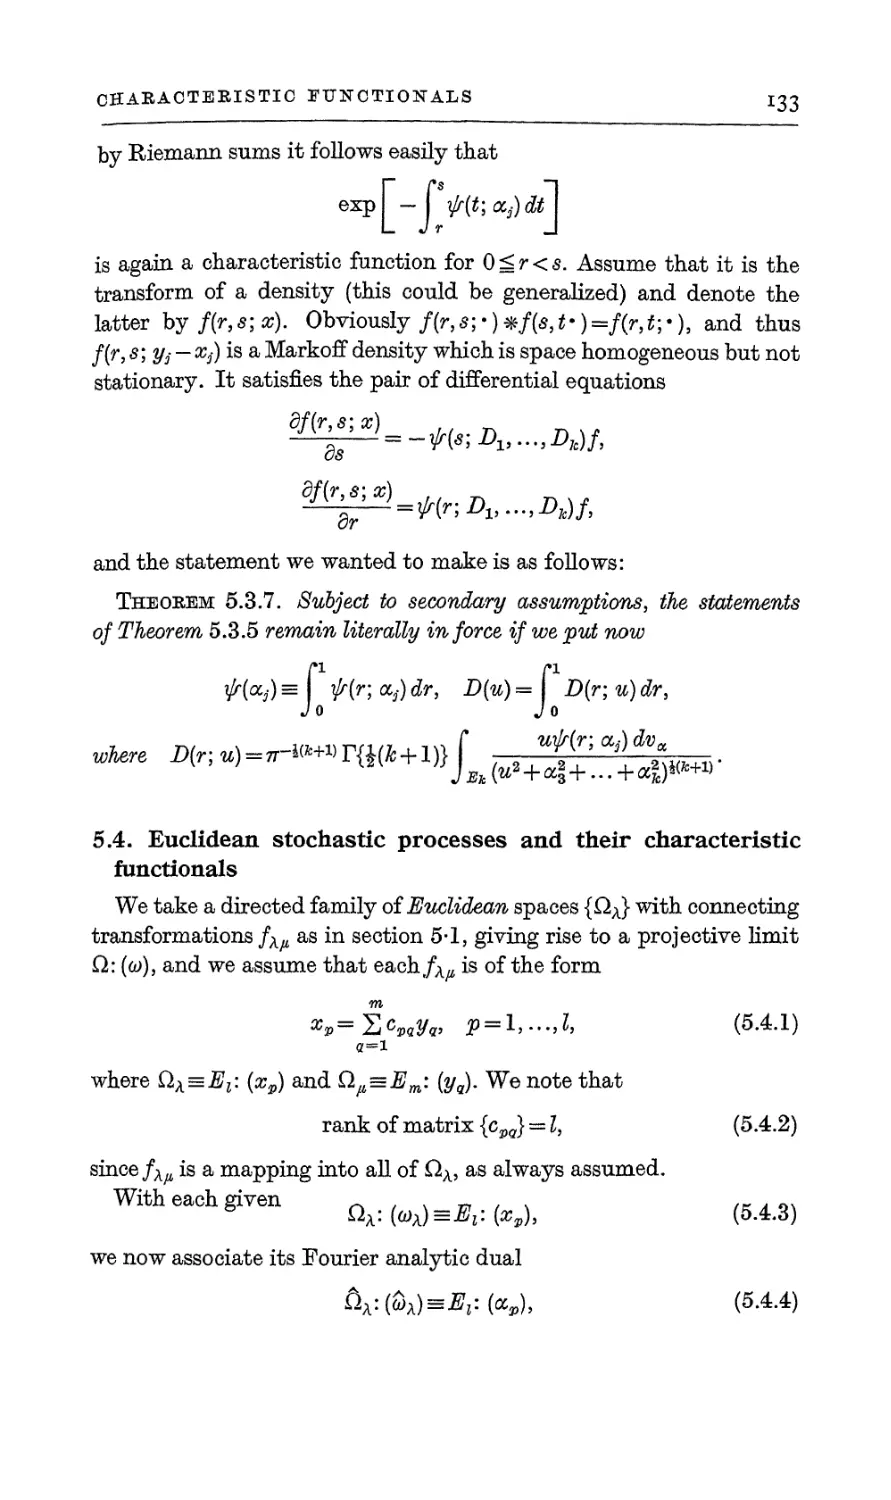 5.4. Euclidean stochastic processes and their characteristic functionals